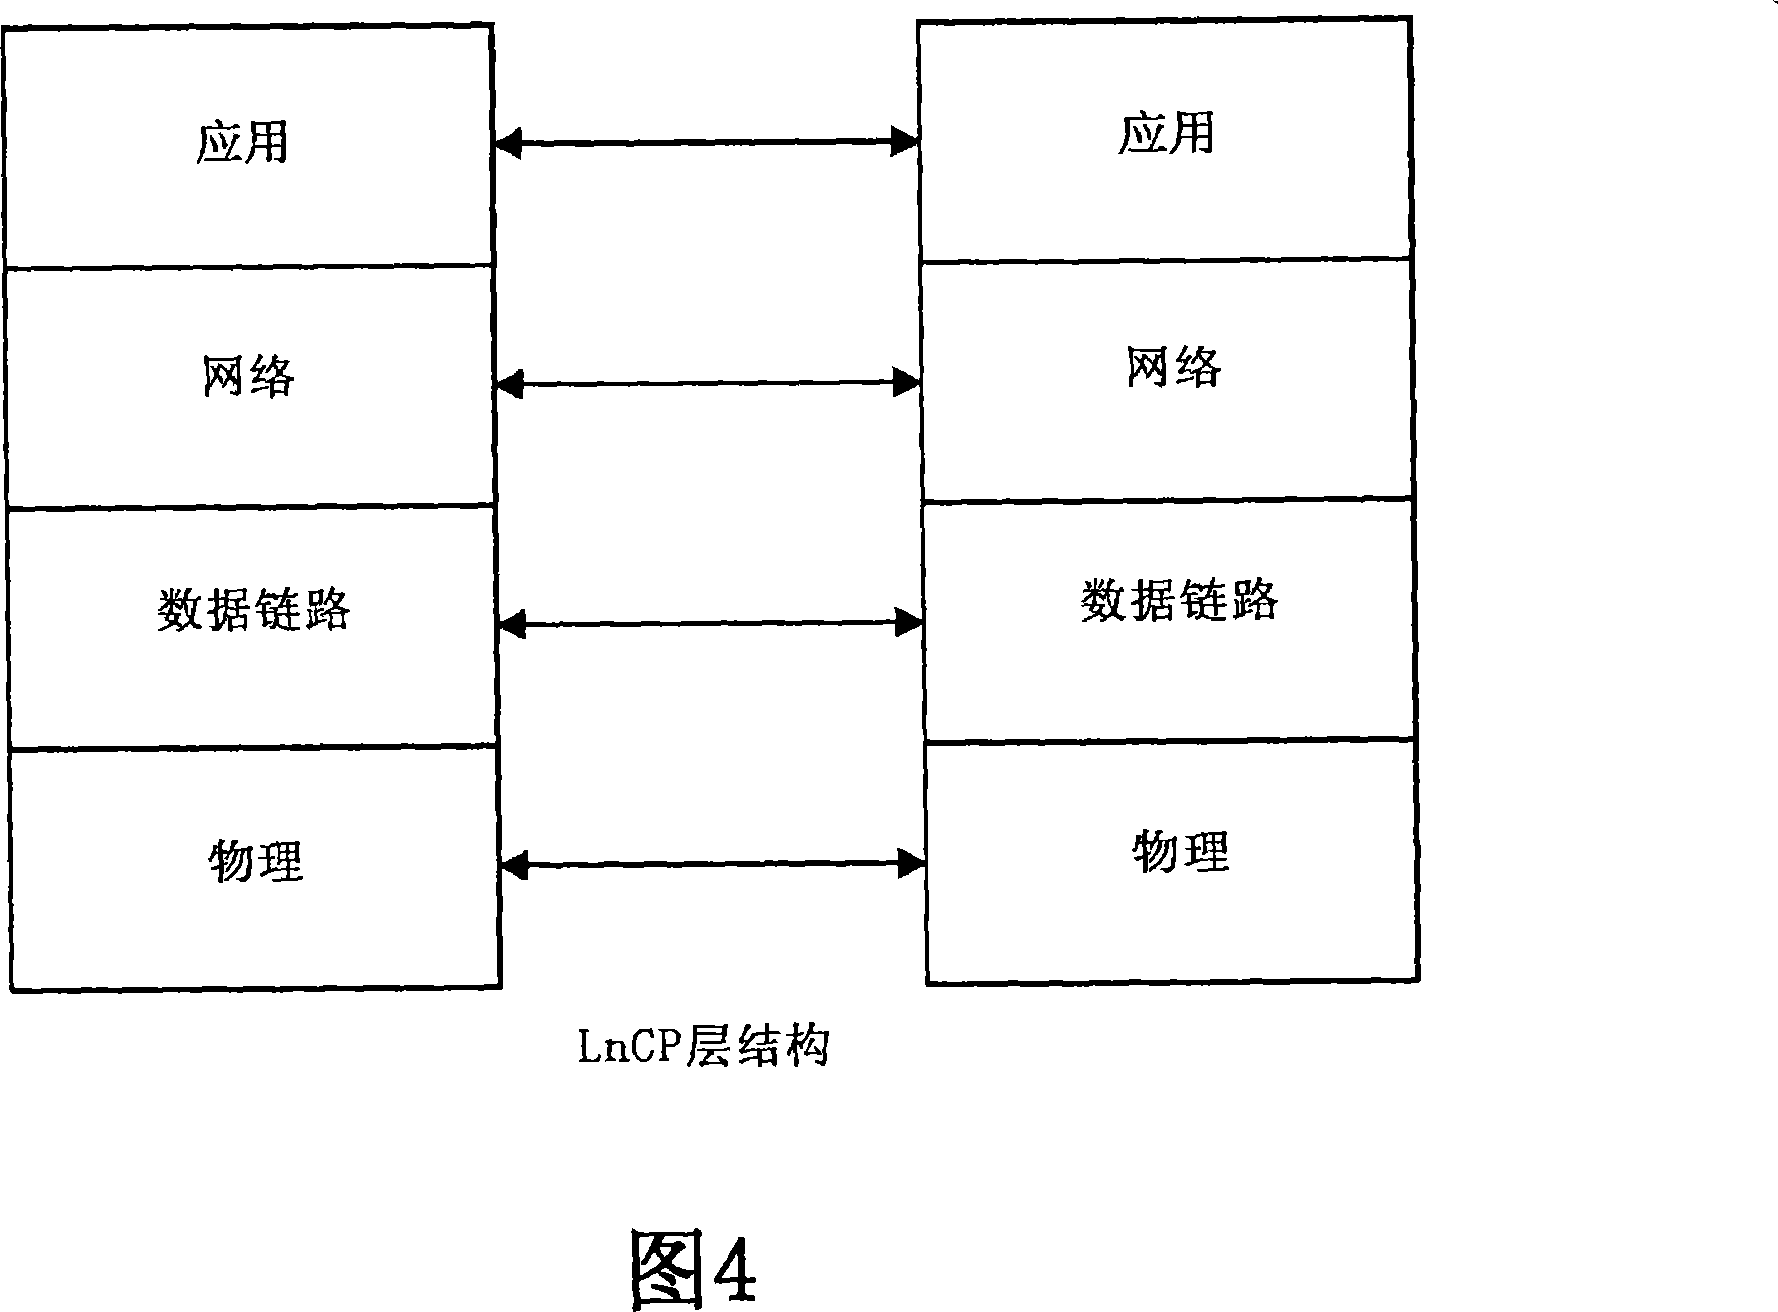 Packet structure and packet transmission method of network control protocol